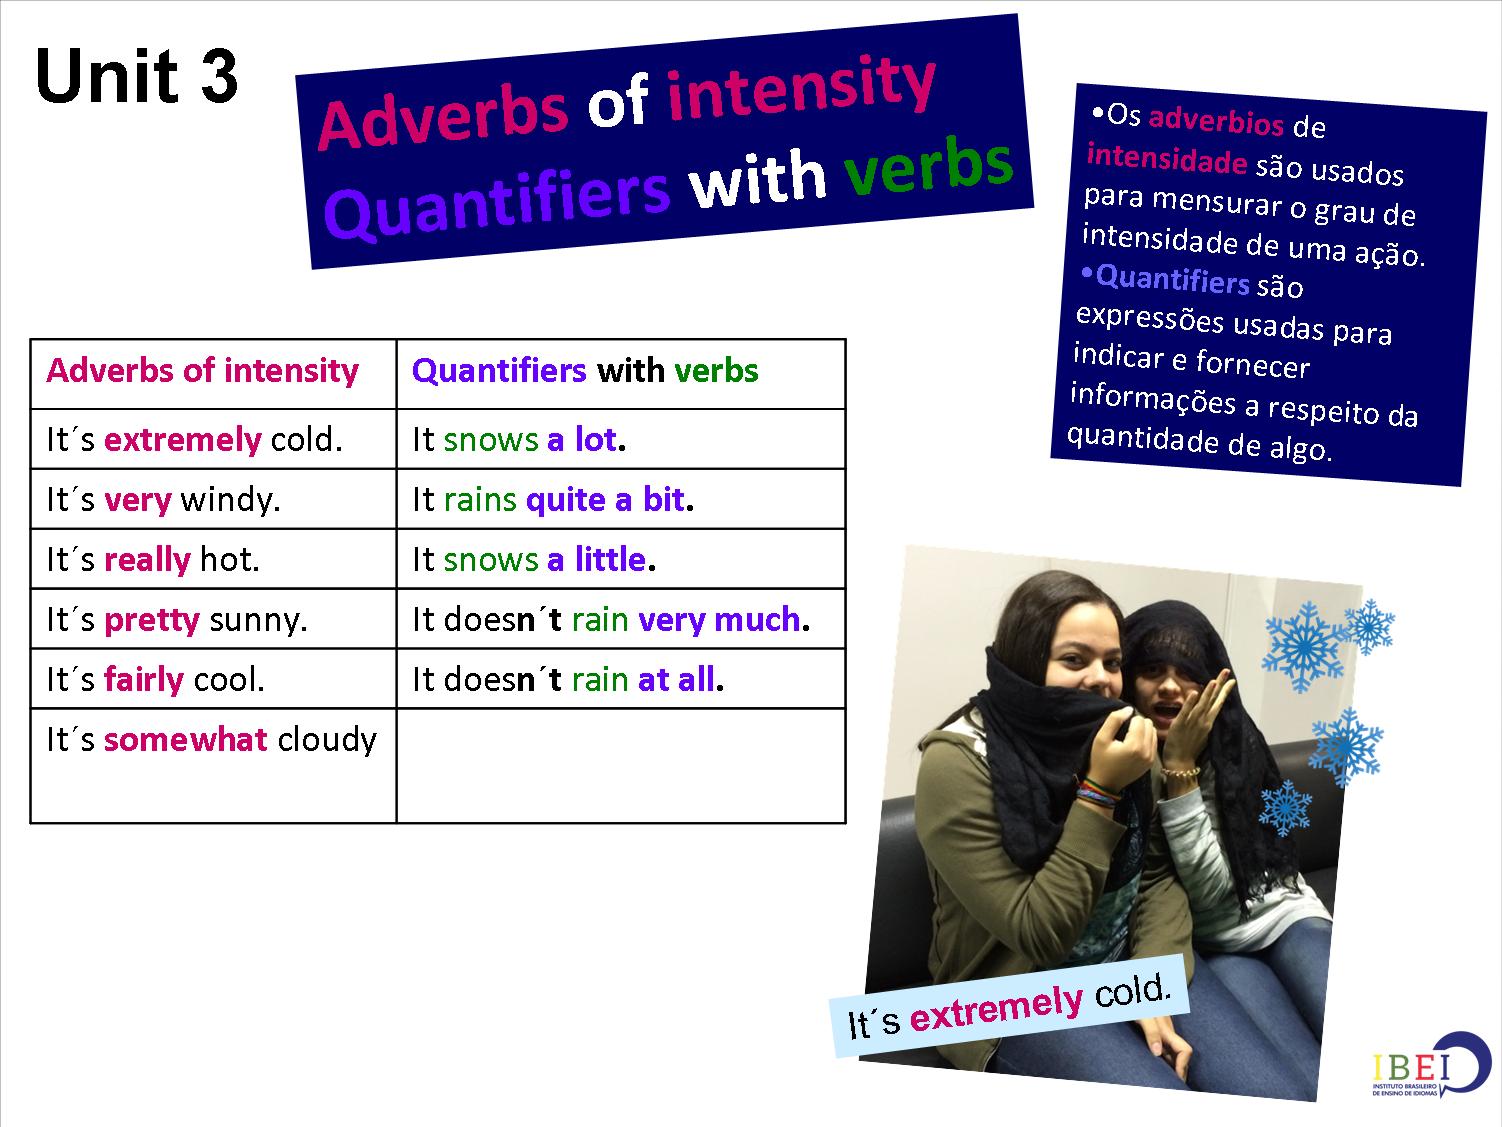 english-fun-ibei-adverbs-of-intensity-quantifiers-with-verbs